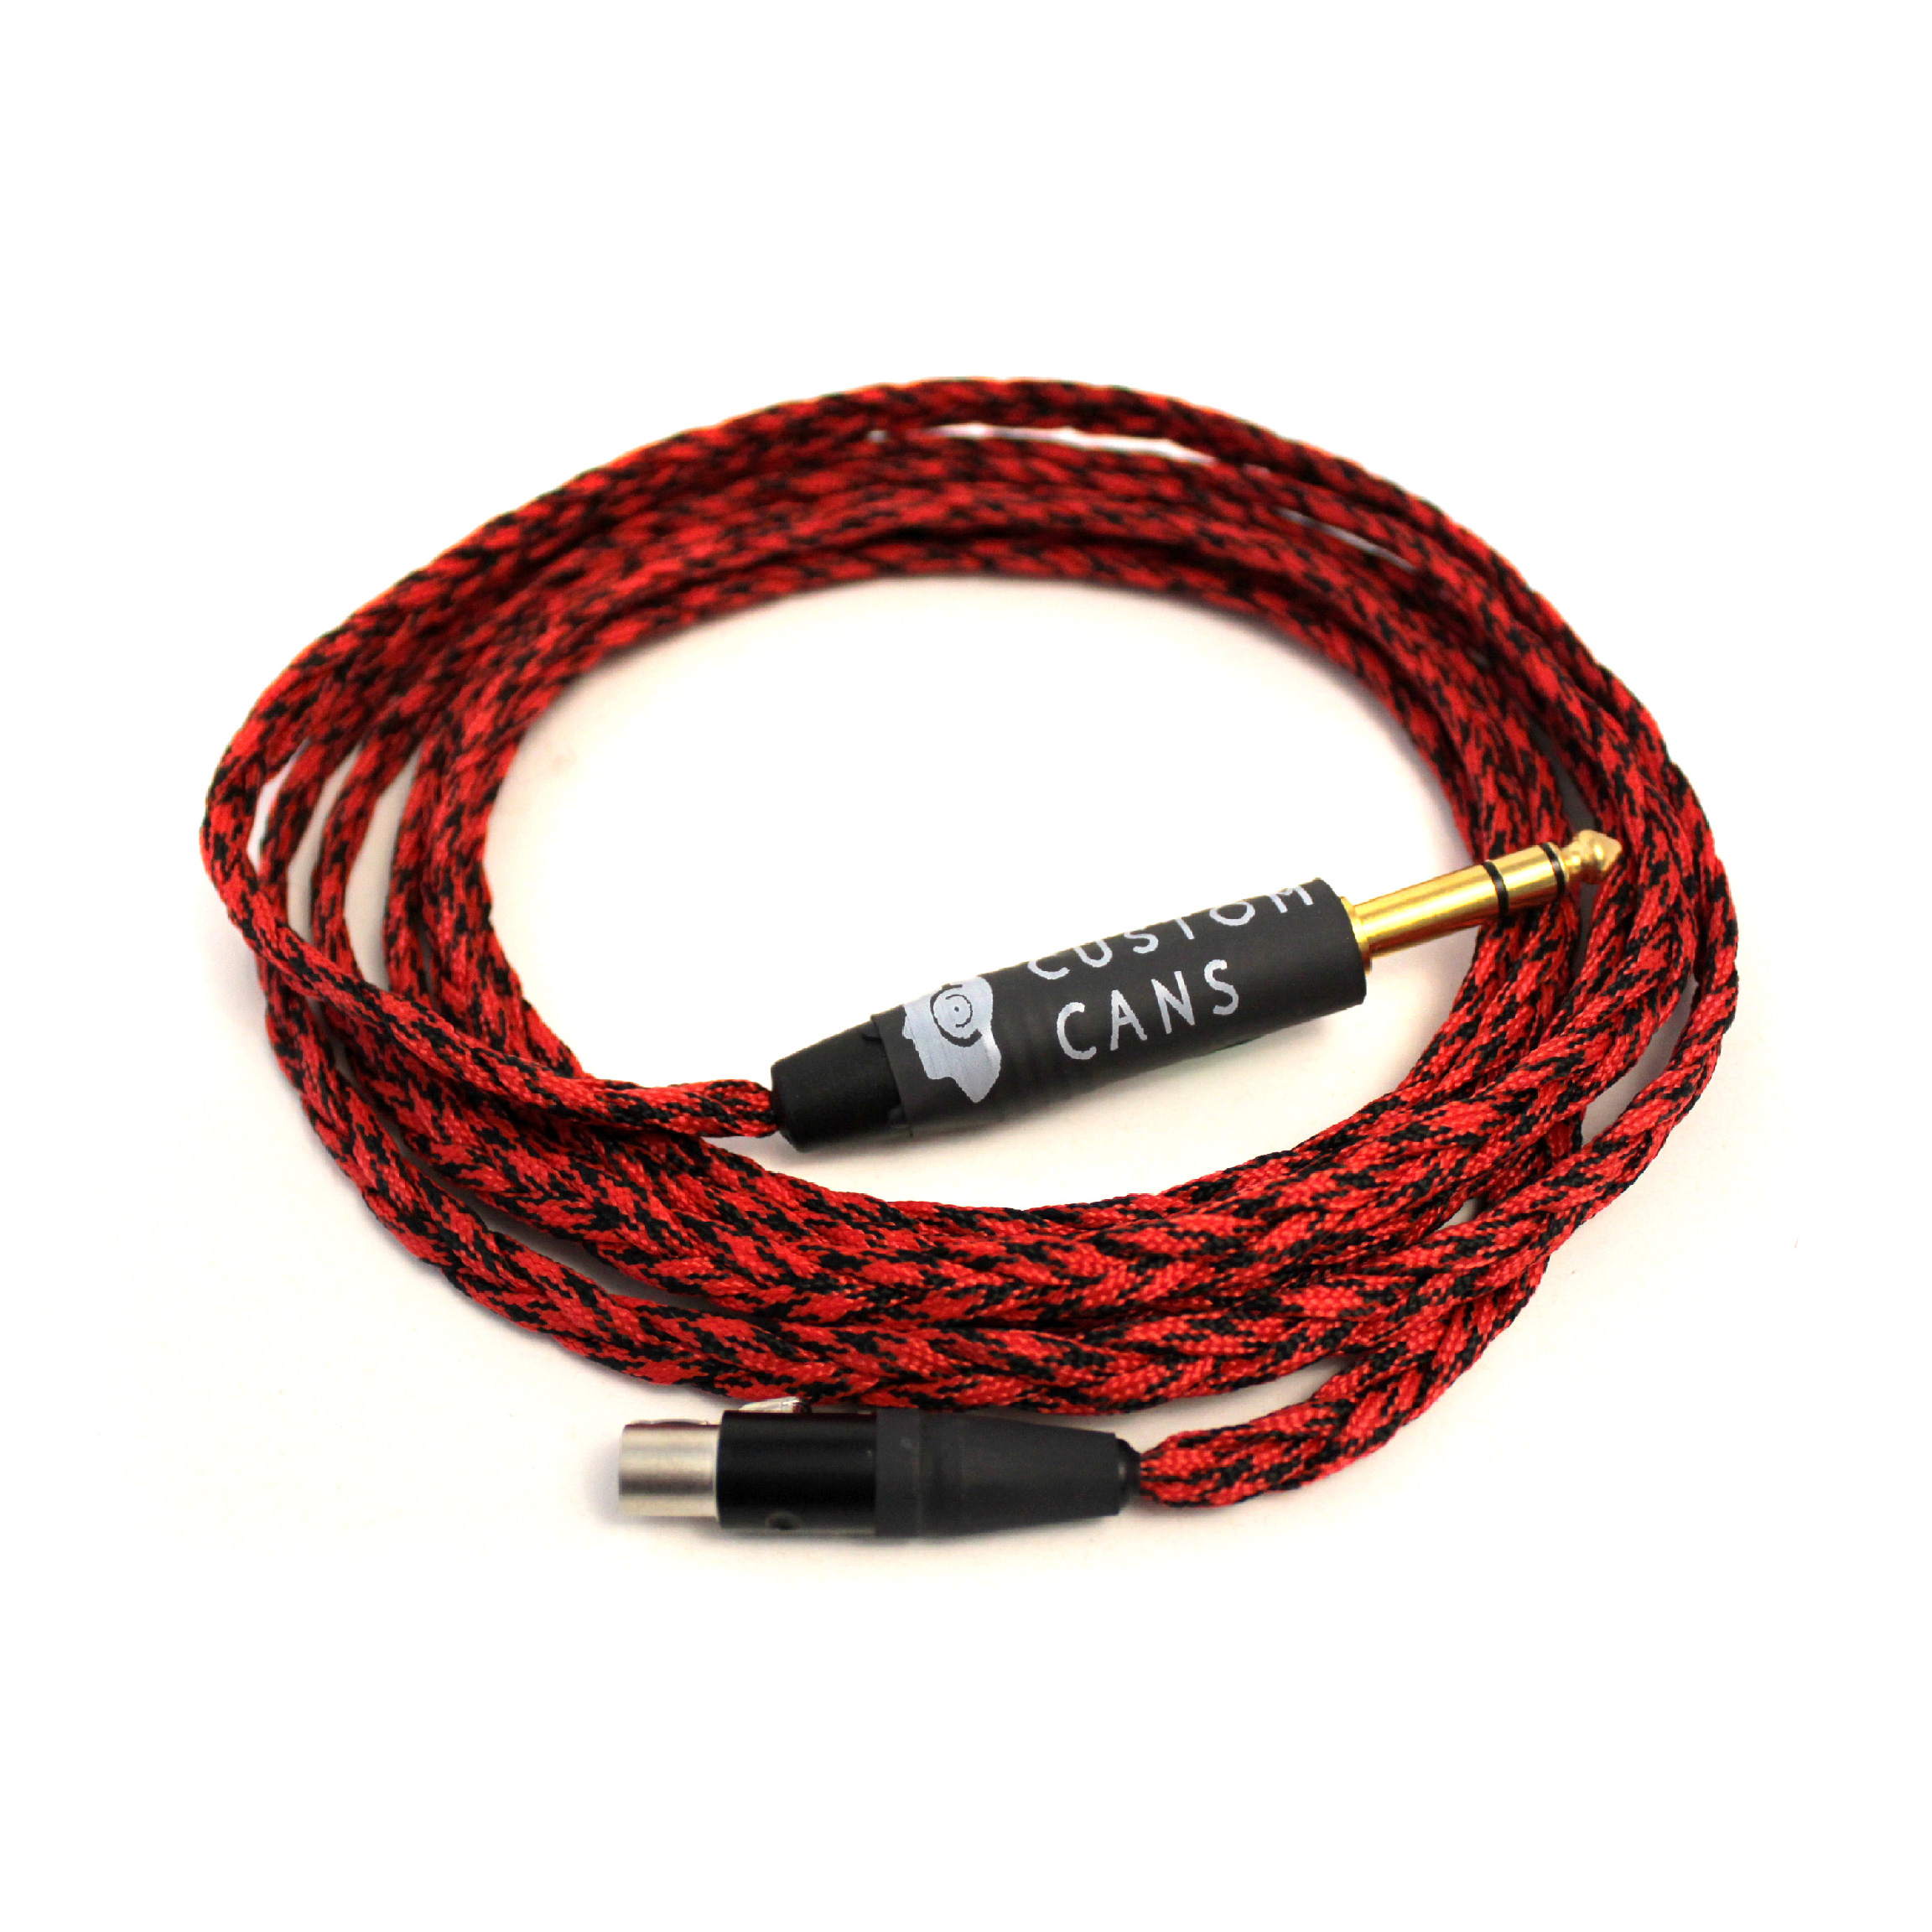 Cable Matters (1/8 Inch) 3.5mm to XLR Cable (XLR to 3.5mm Cable